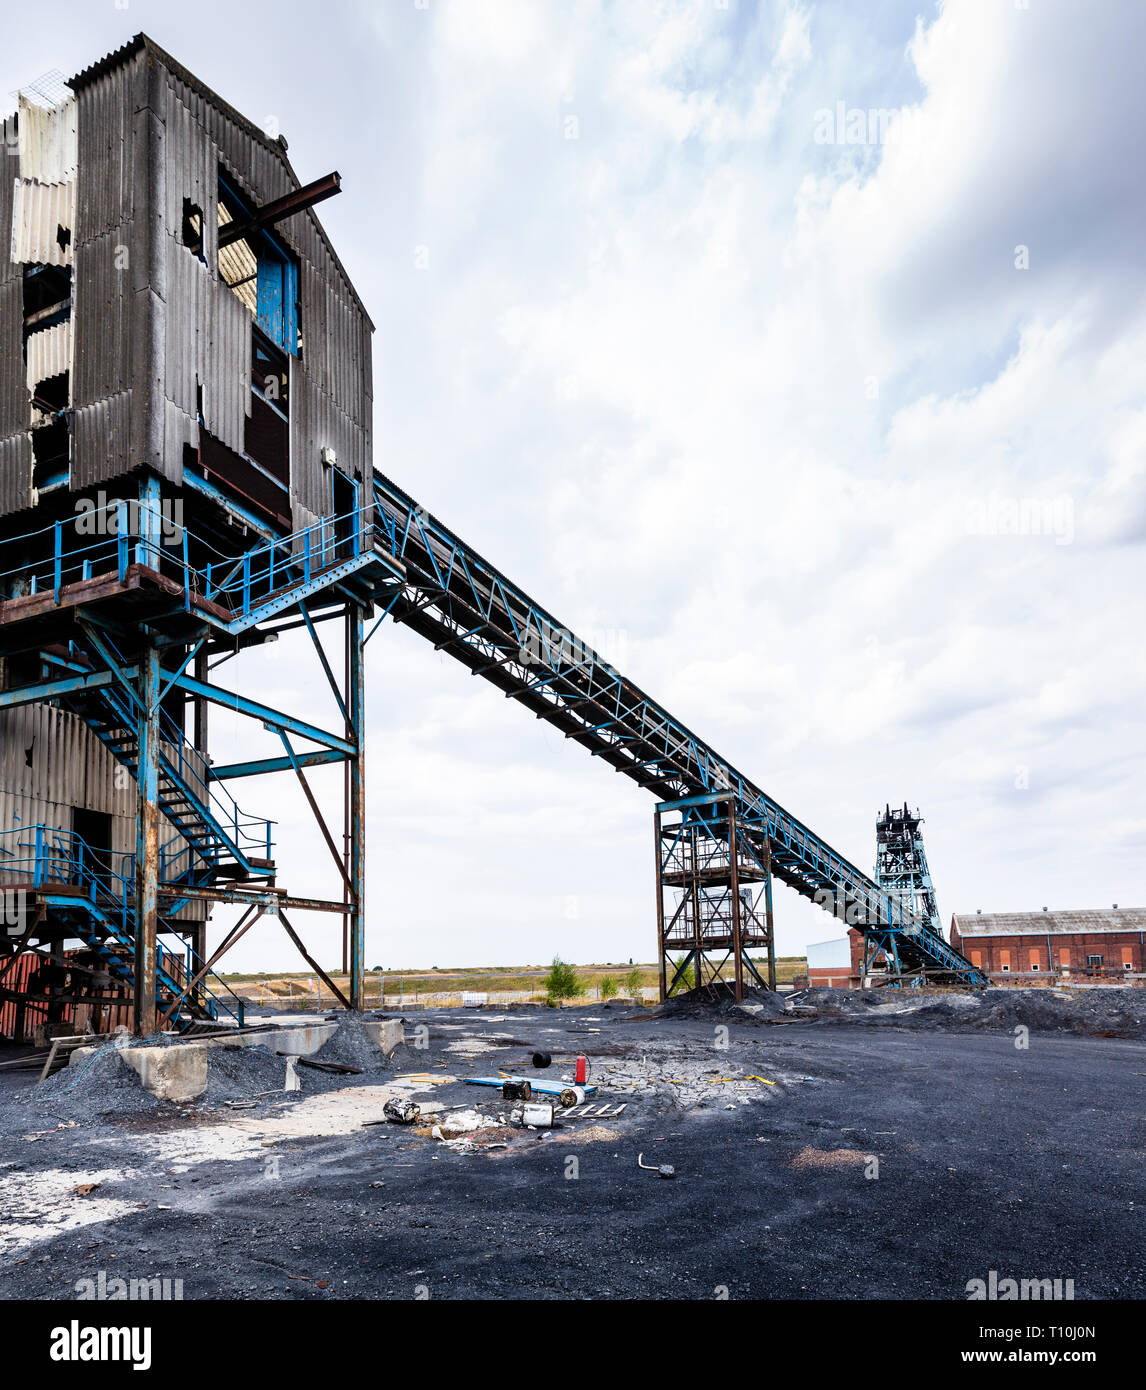 Colliery coal screens. and Conveyor belts Stock Photo